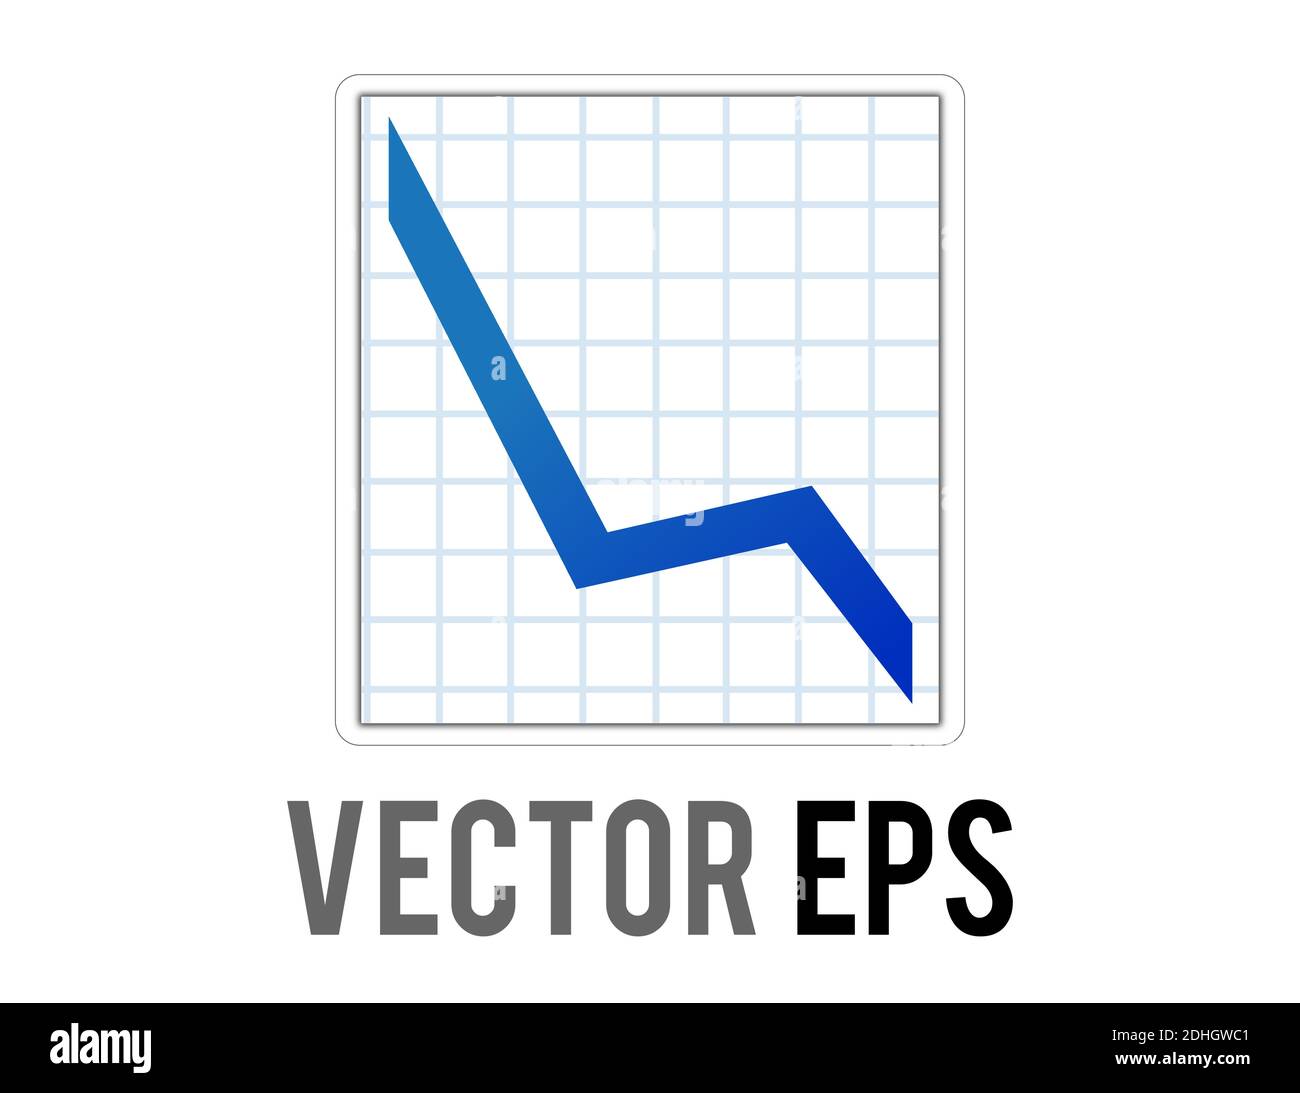 The Vector business presentation summary finance report bar chart decreasing icon showing three different colored vertical rectangles Stock Vector